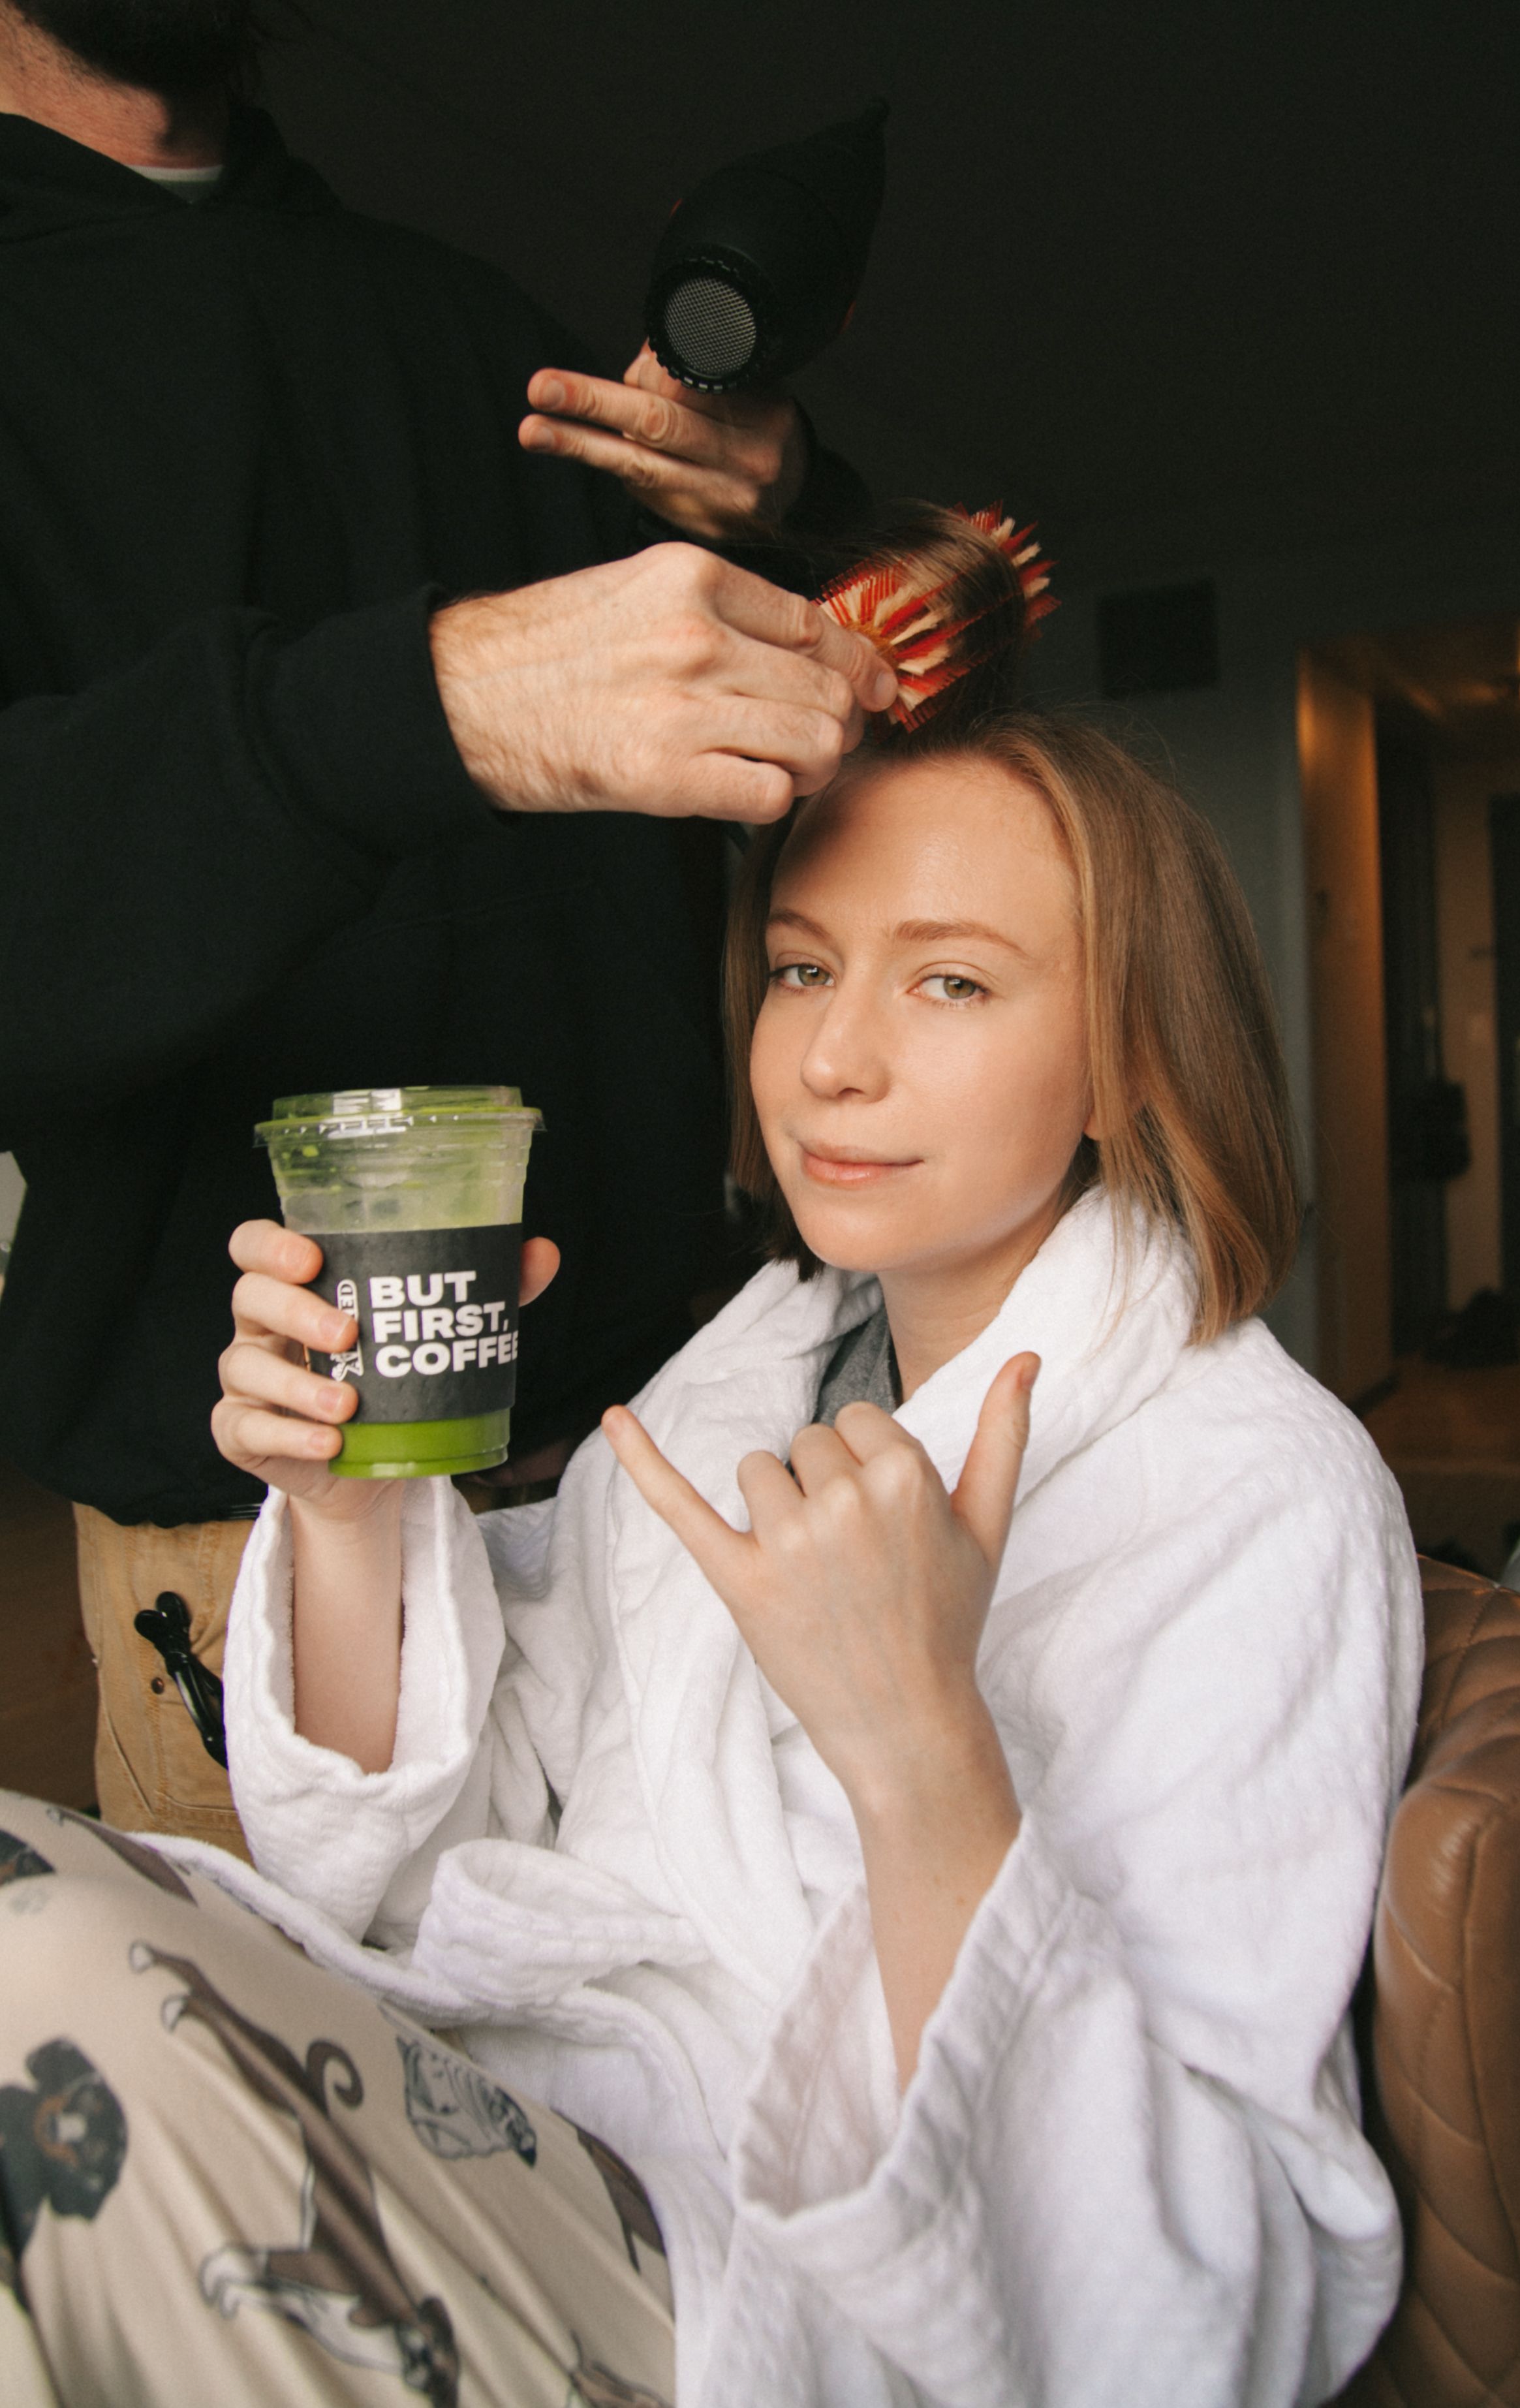 hannah einbinder holding a green juice and making a rock on sign at the camera